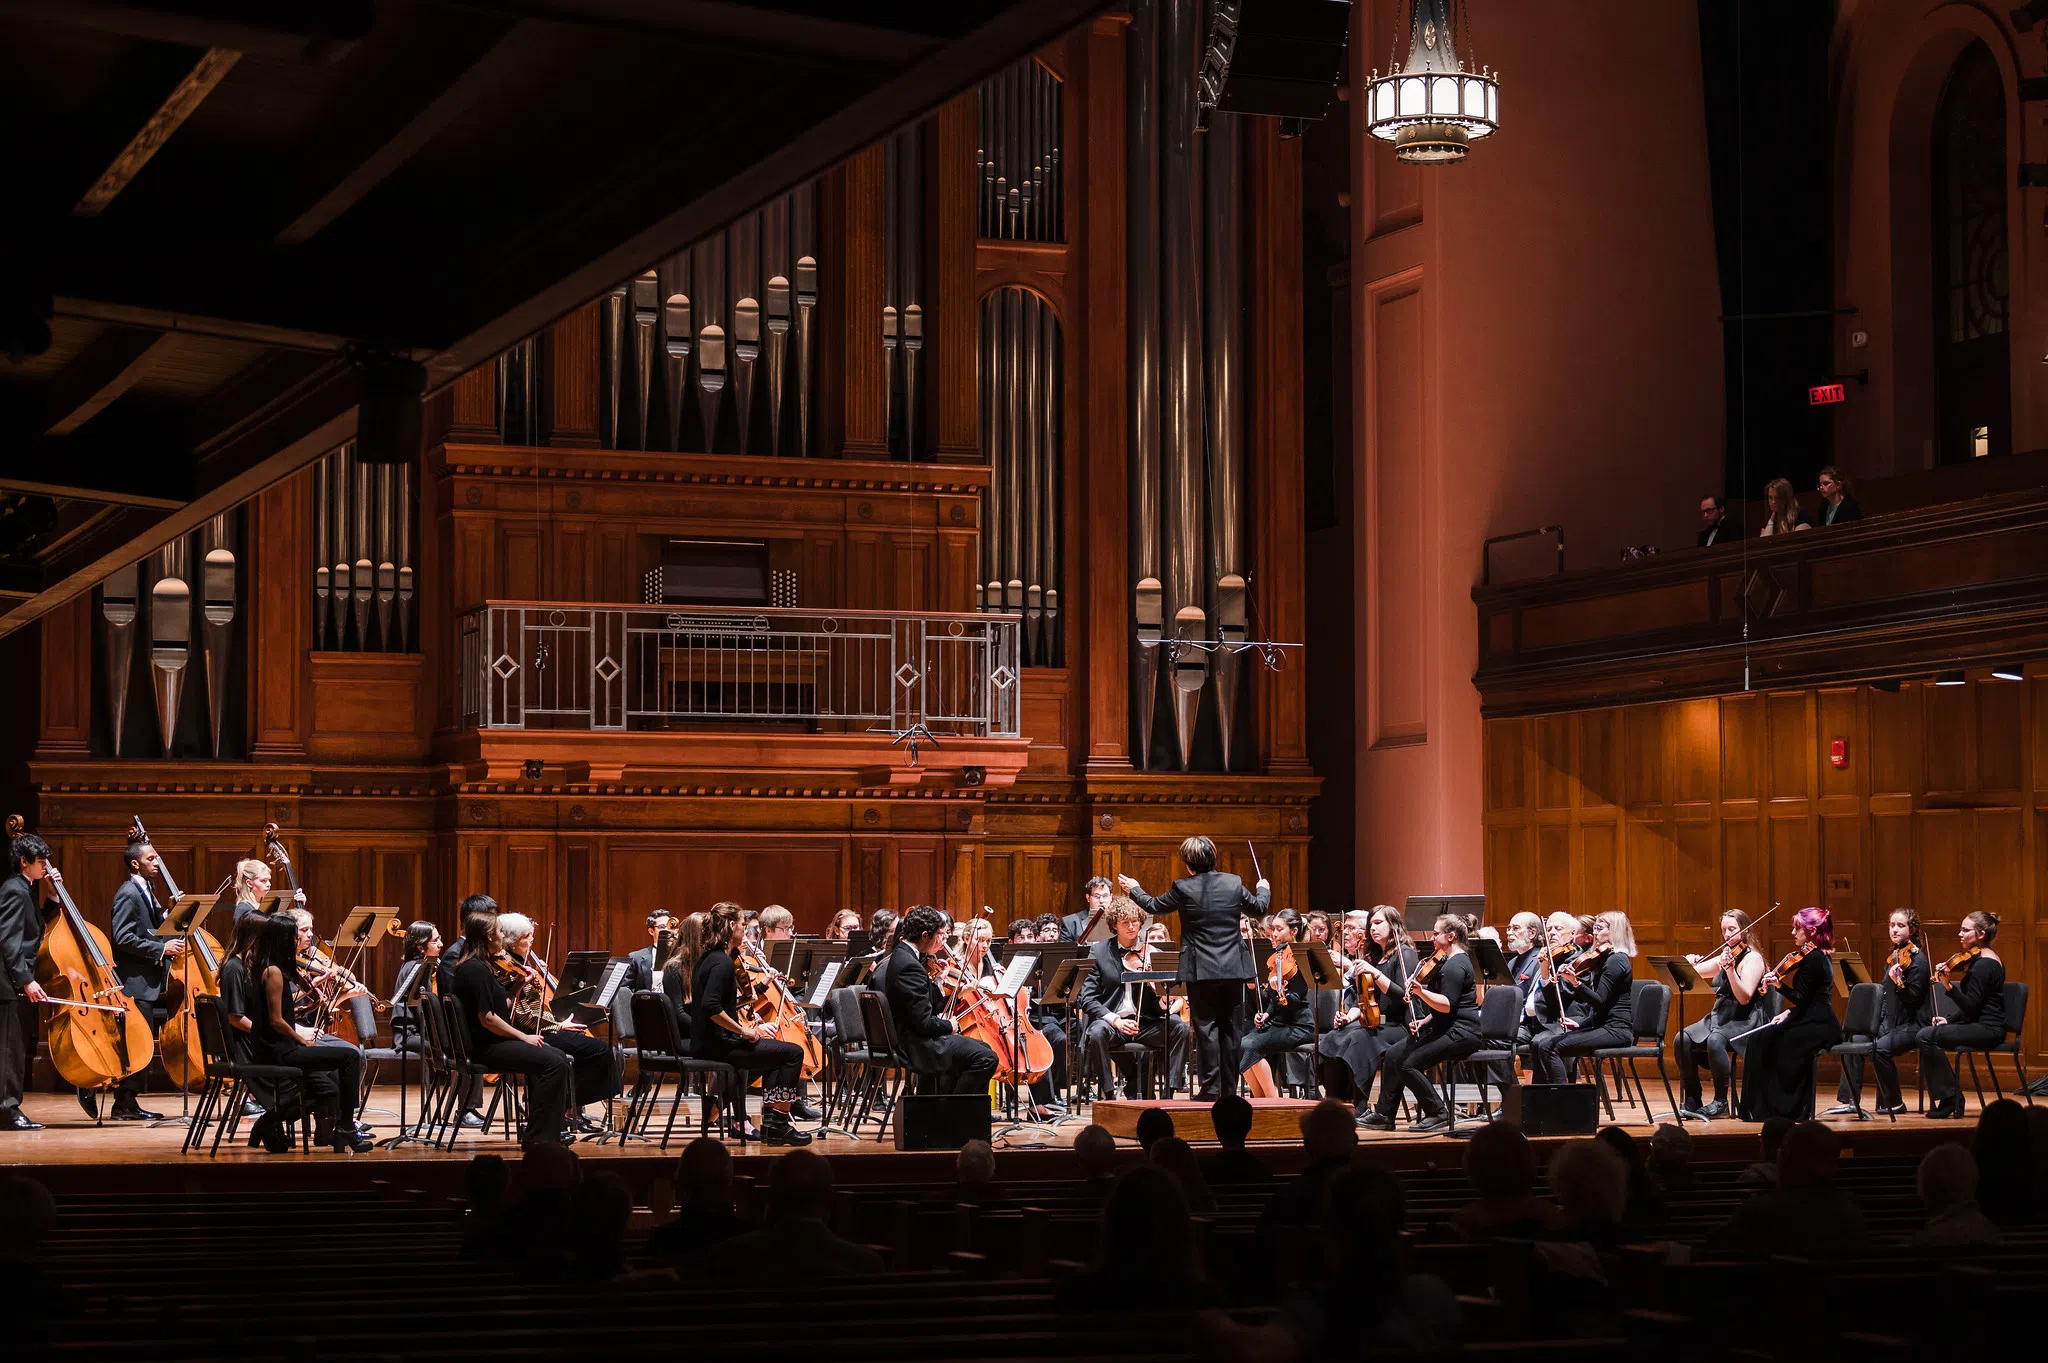 A full orchestra performs in front of a majestic organ.